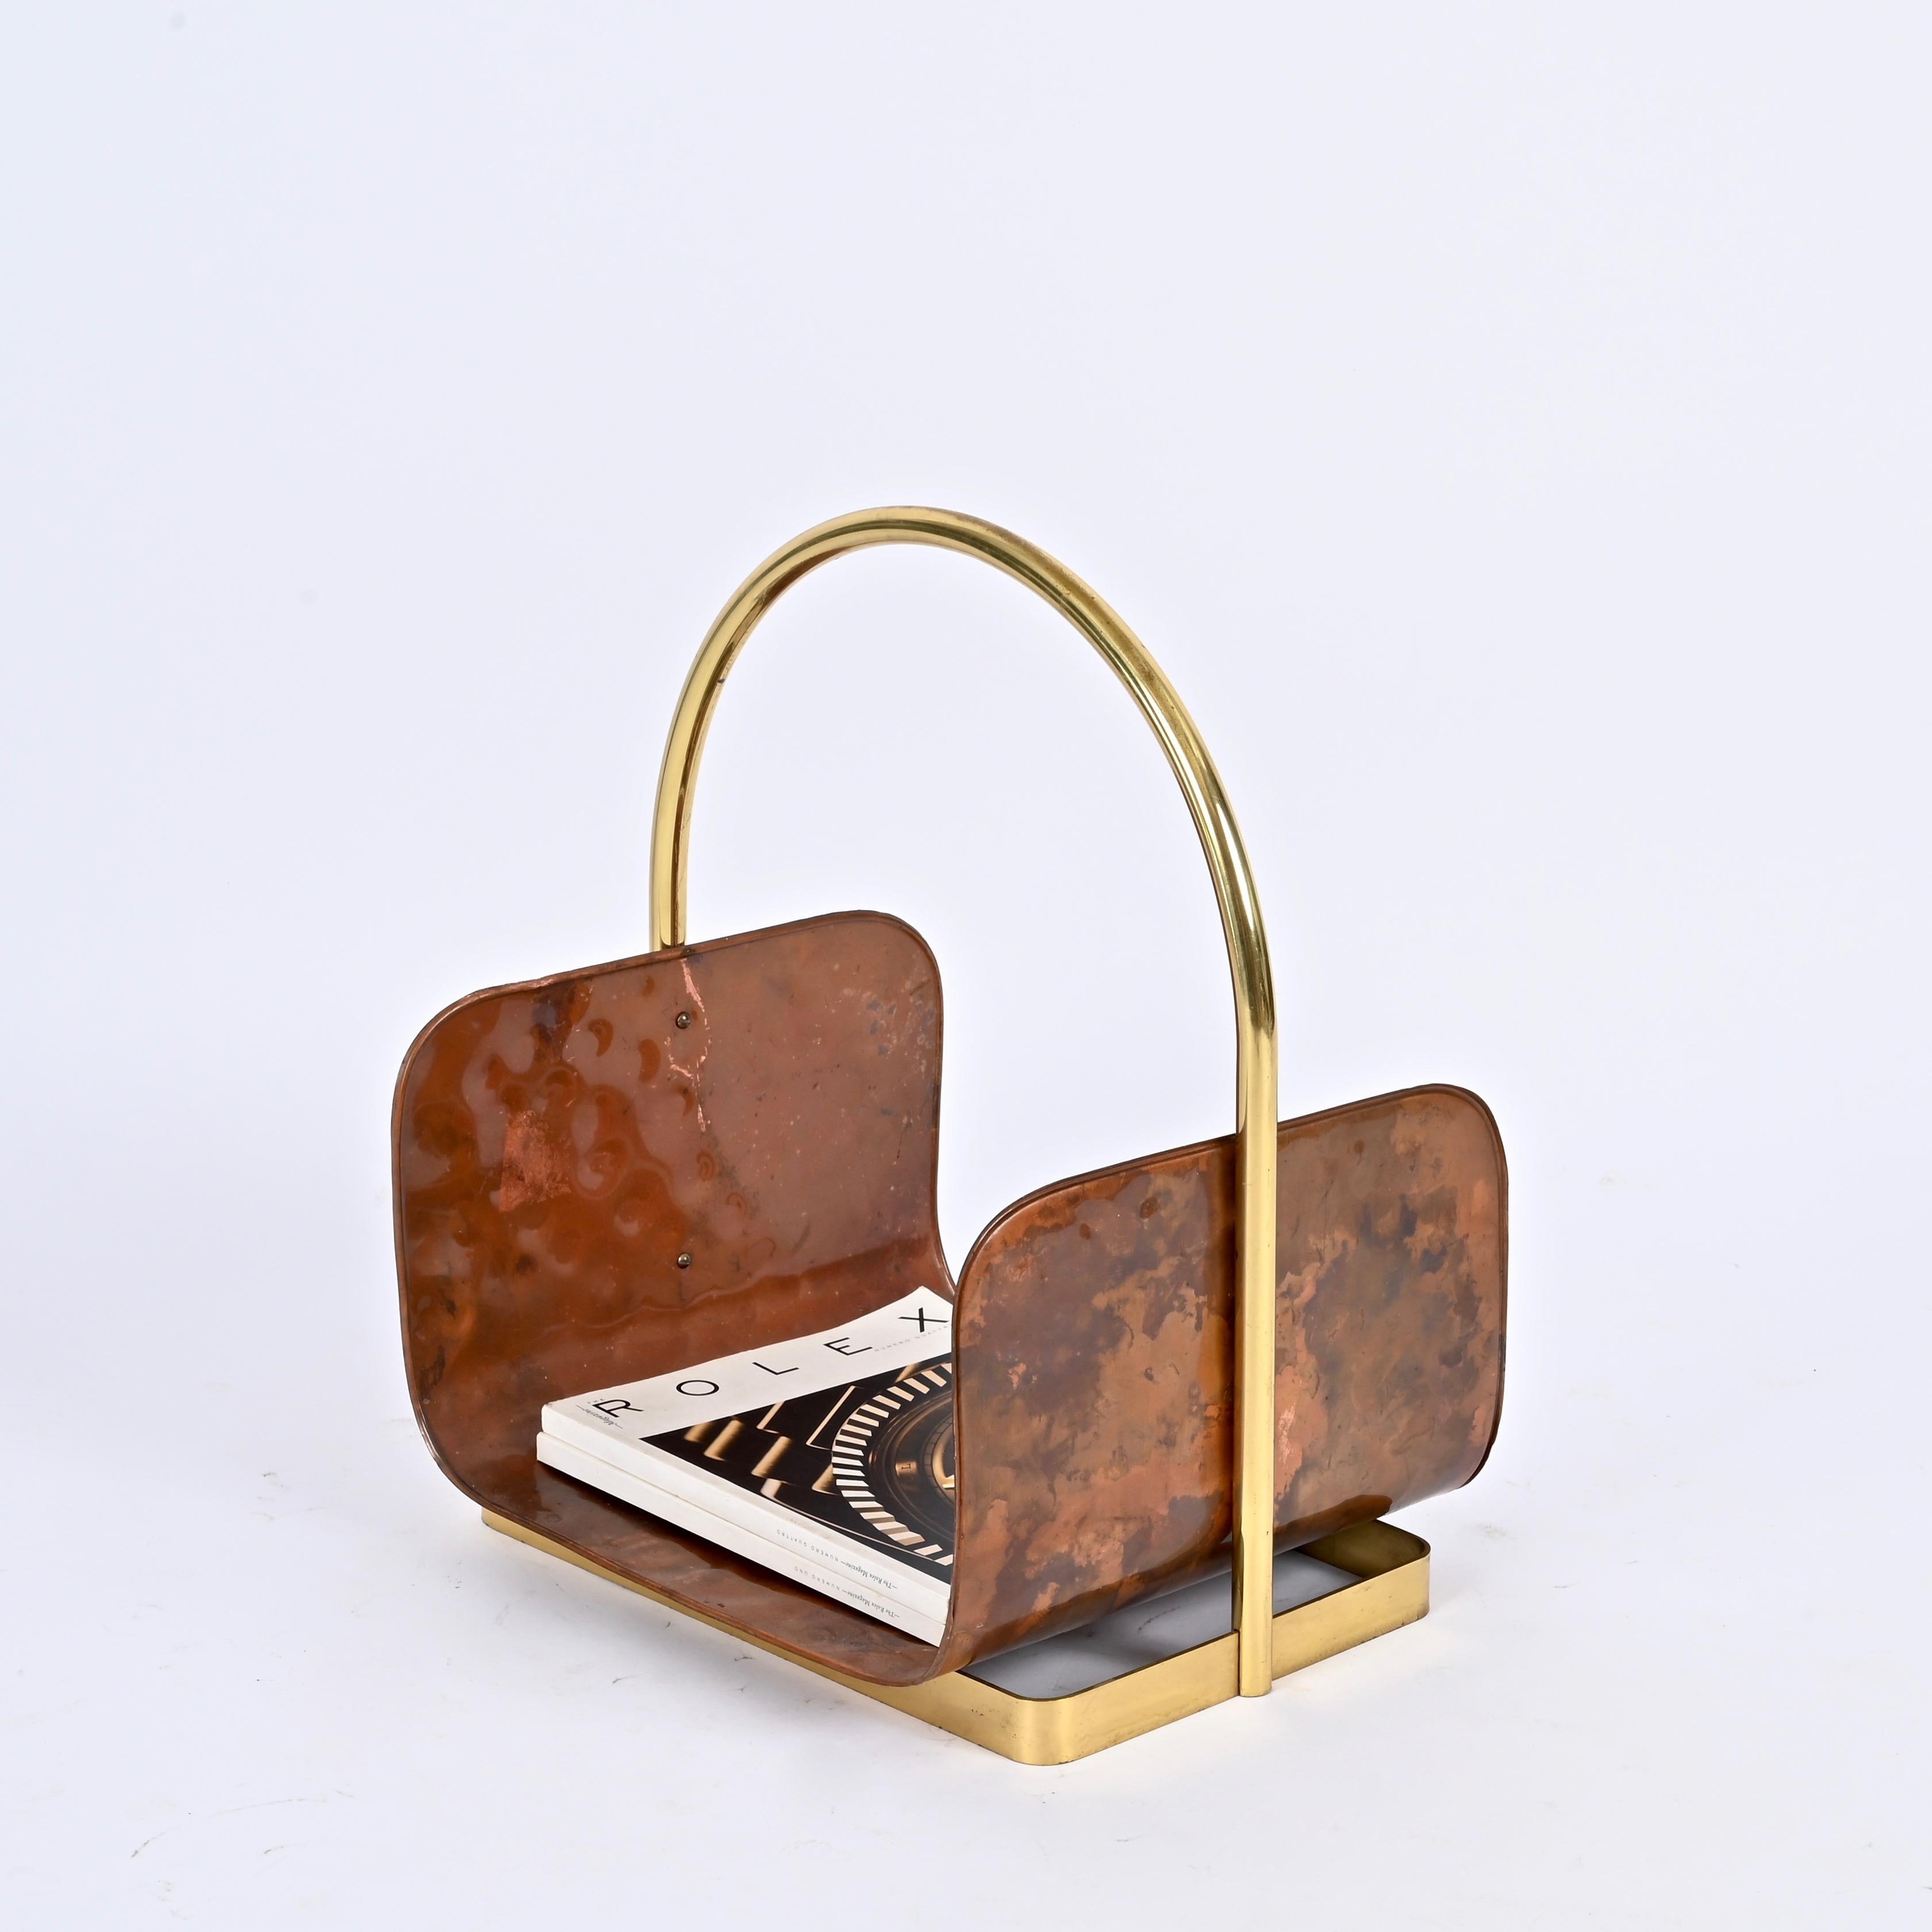 Enameled Midcentury Italian Magazine Rack in Hammered Copper and Brass, Italy 1970s For Sale